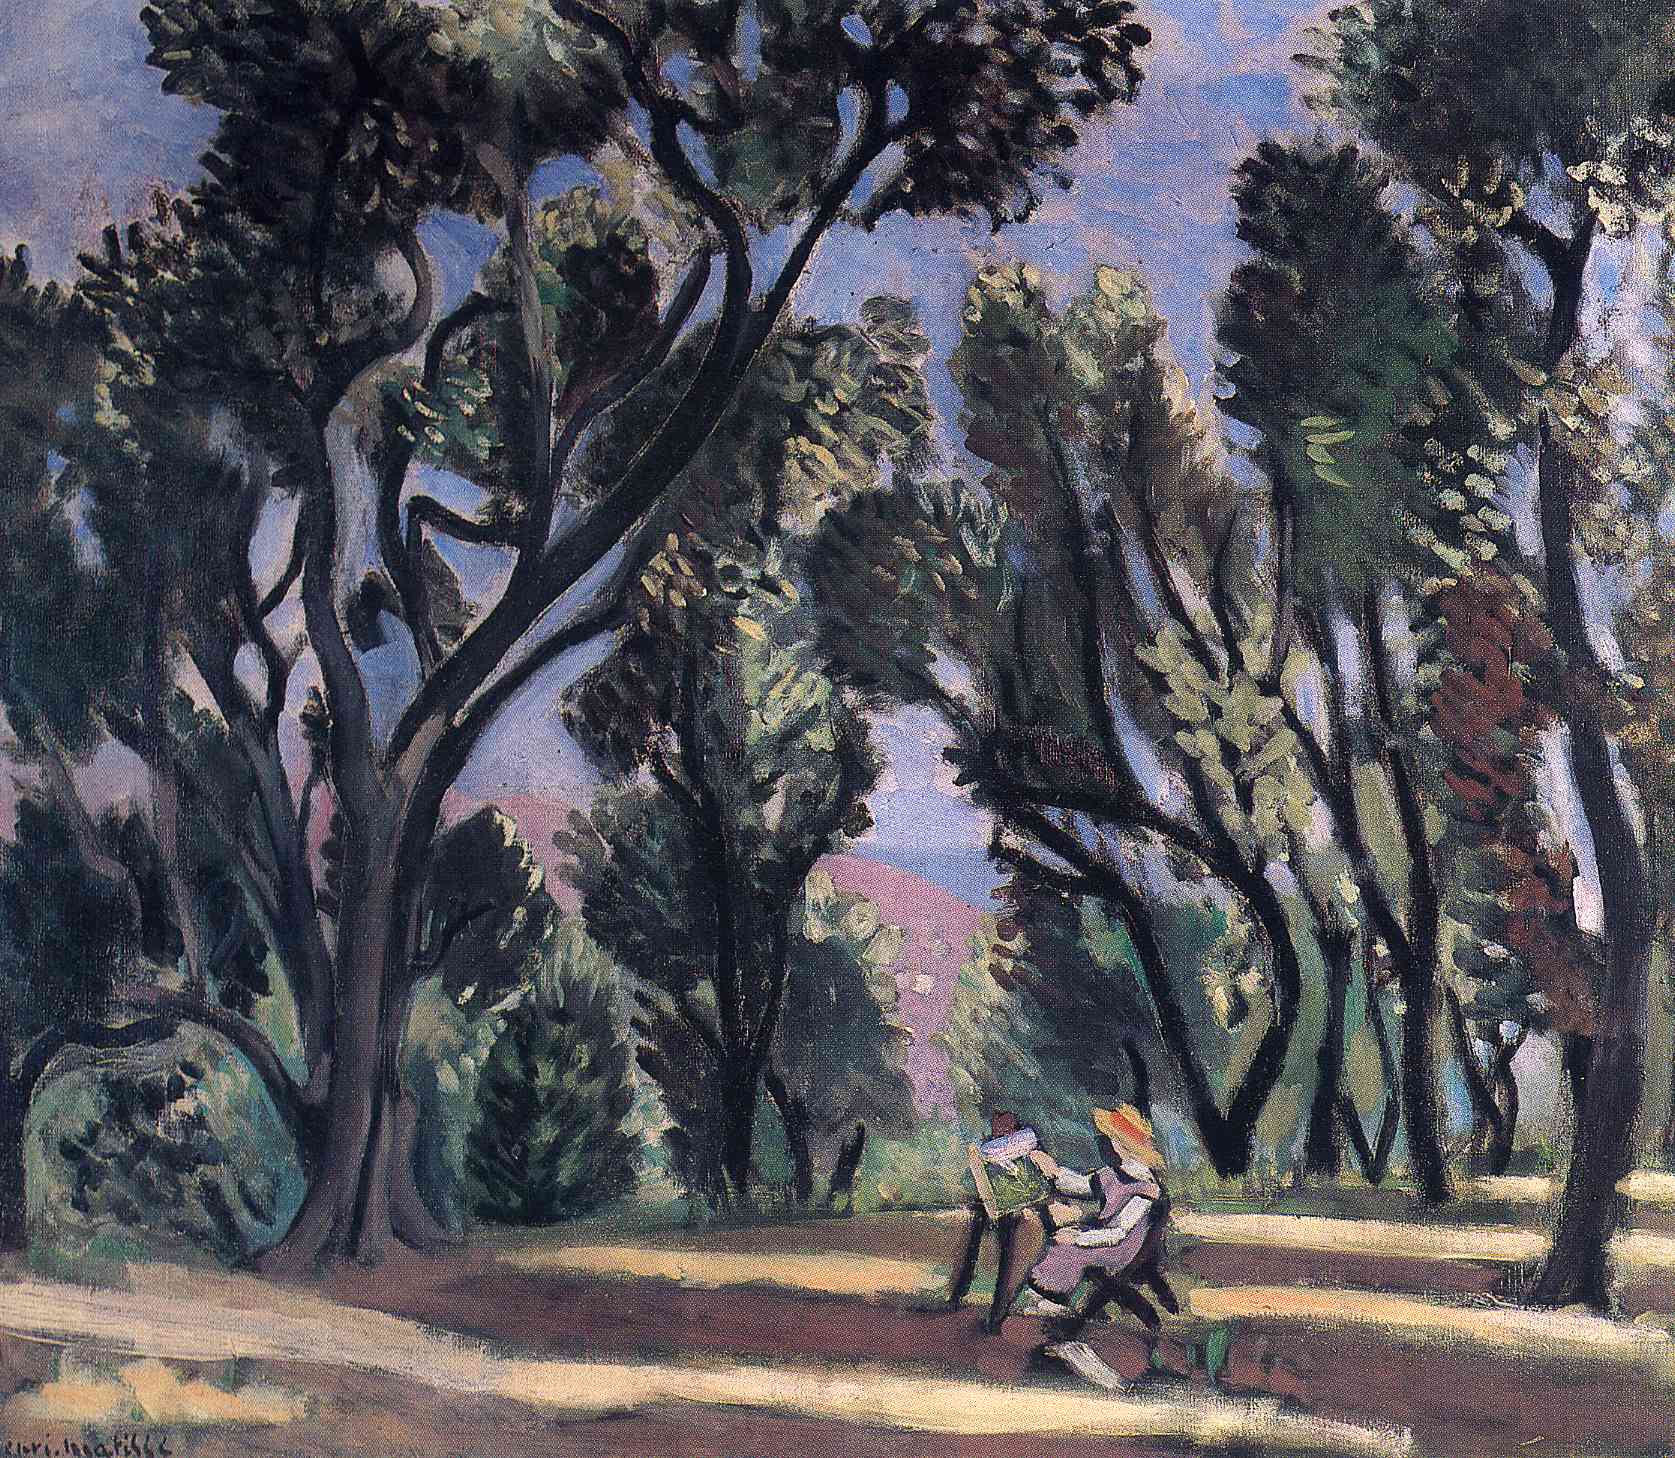 Landscape With a Bench (1918).